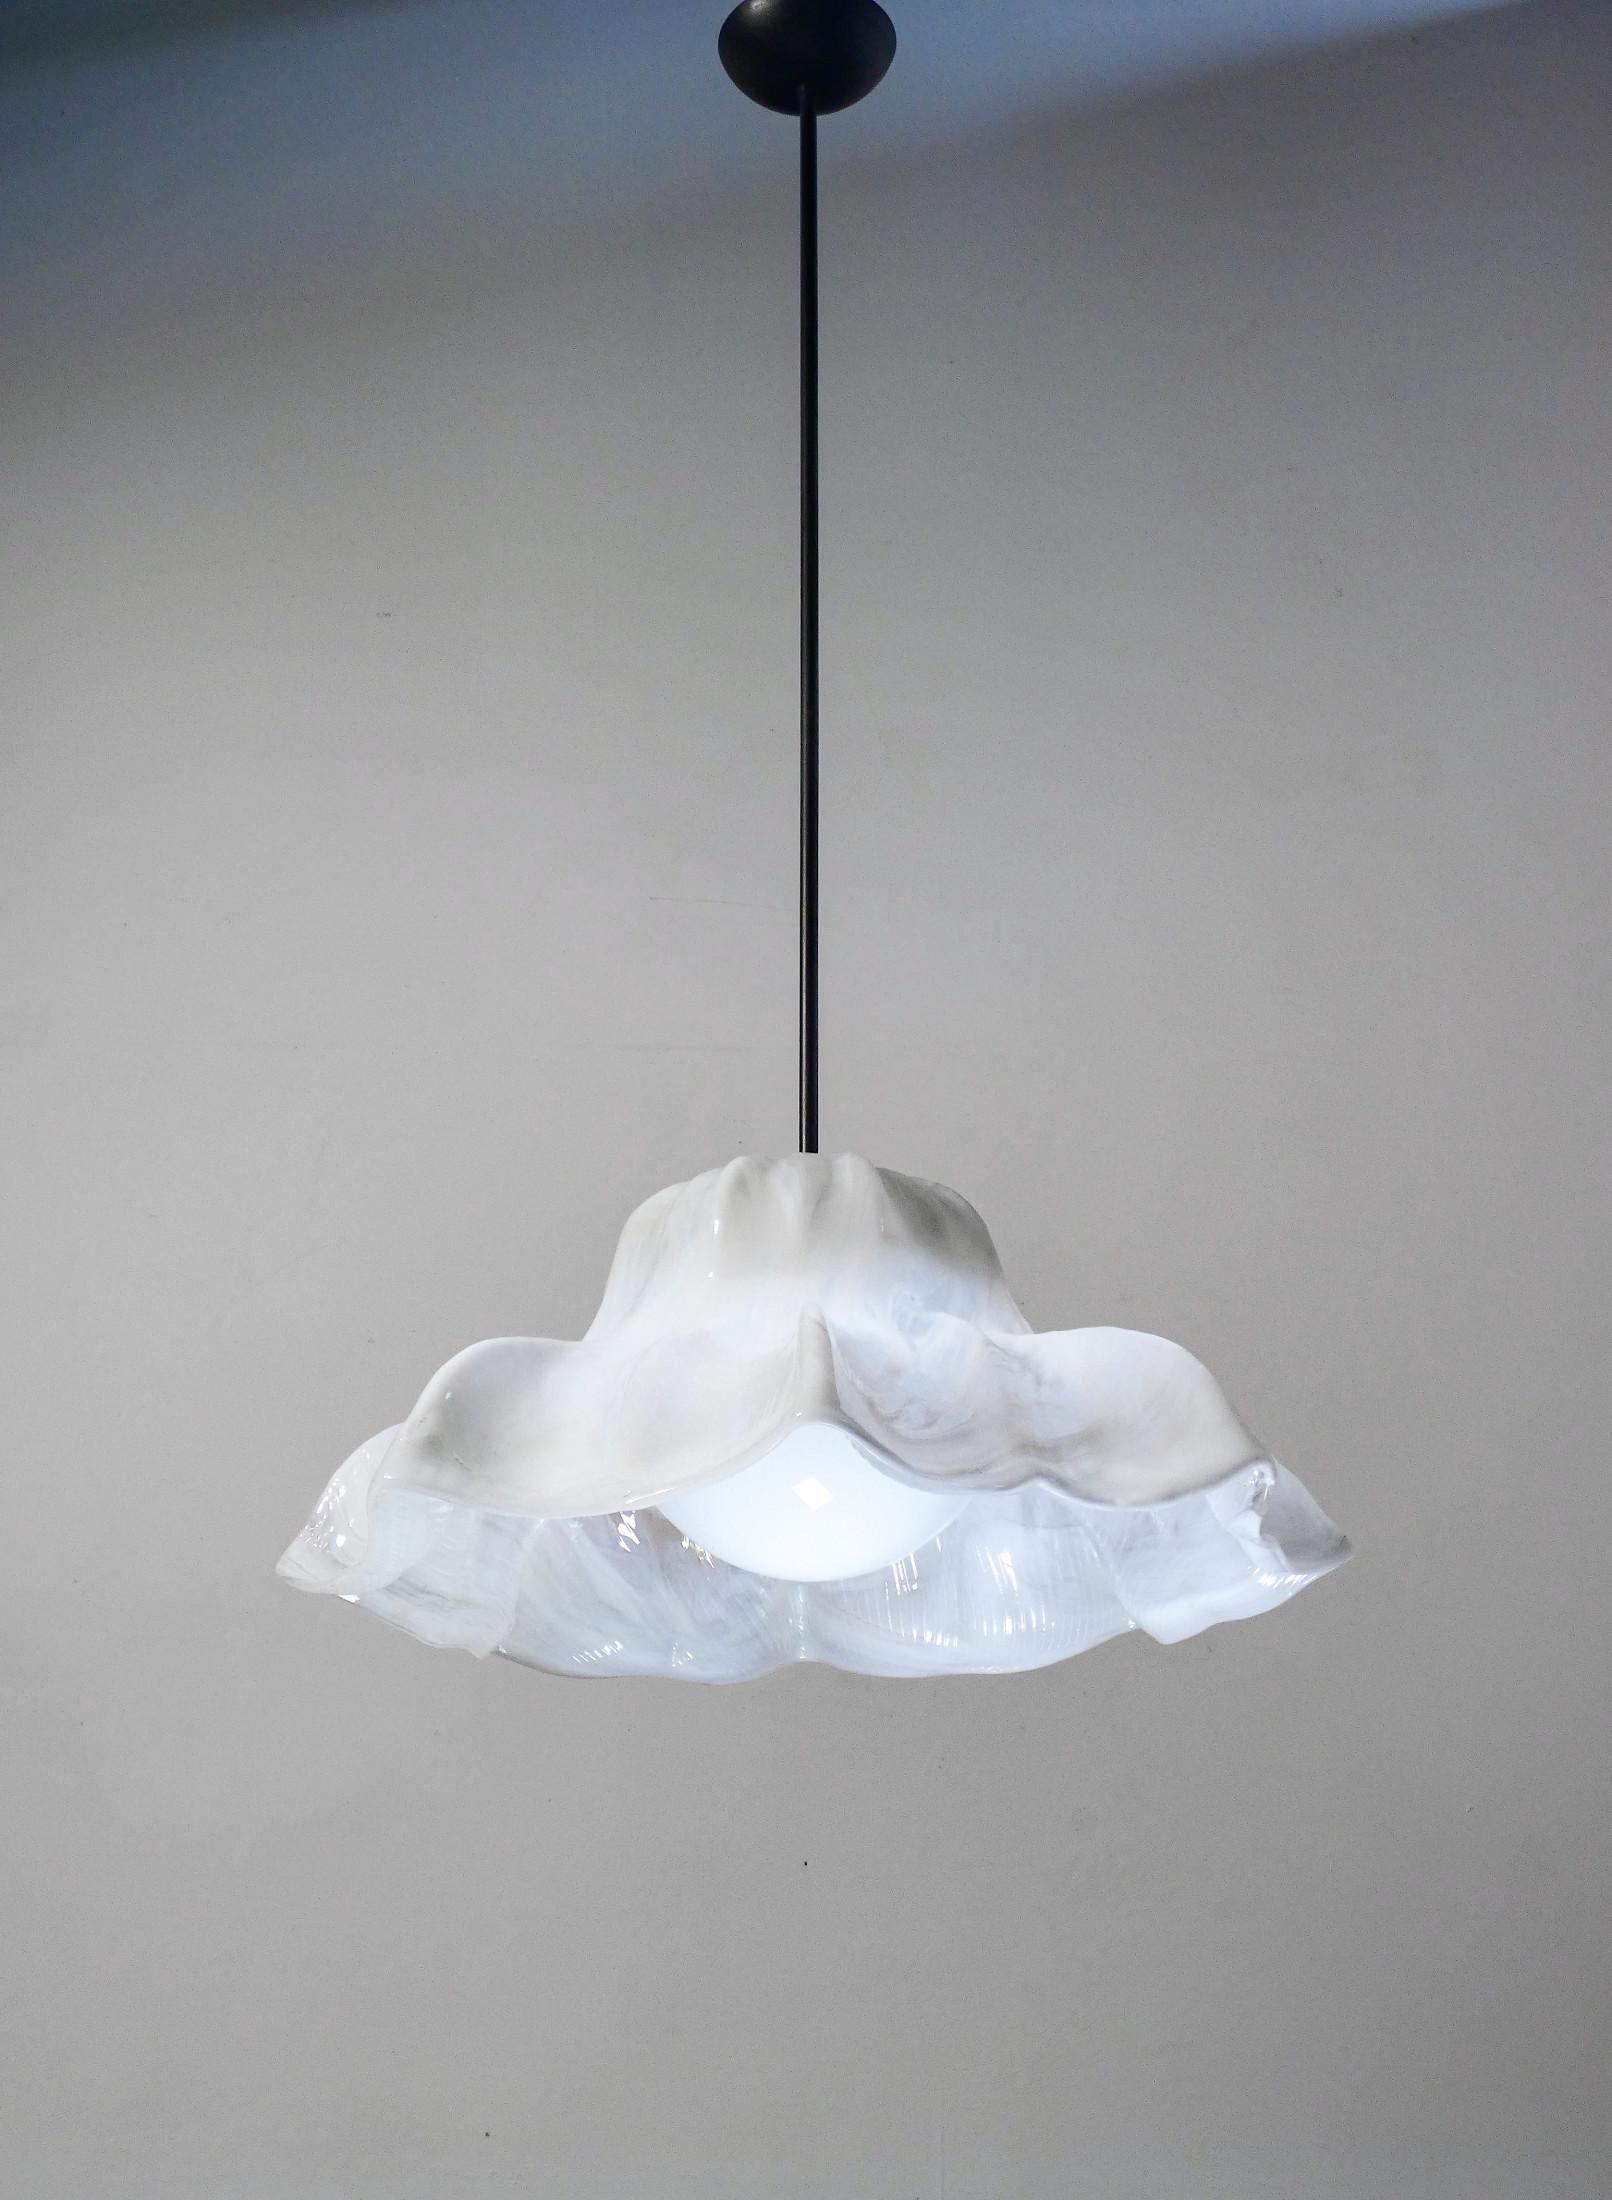 Glass Chandelier
blown series
Water lilies
design Toni ZUCCHERI
for VENINI.

ORIGIN
Italy

PERIOD
Anni 60

DESIGNER
TONI SUGAR
Son of the animal rights painter Luigi Zuccheri, he inherits his passion for animals, recurring subjects in his creations.